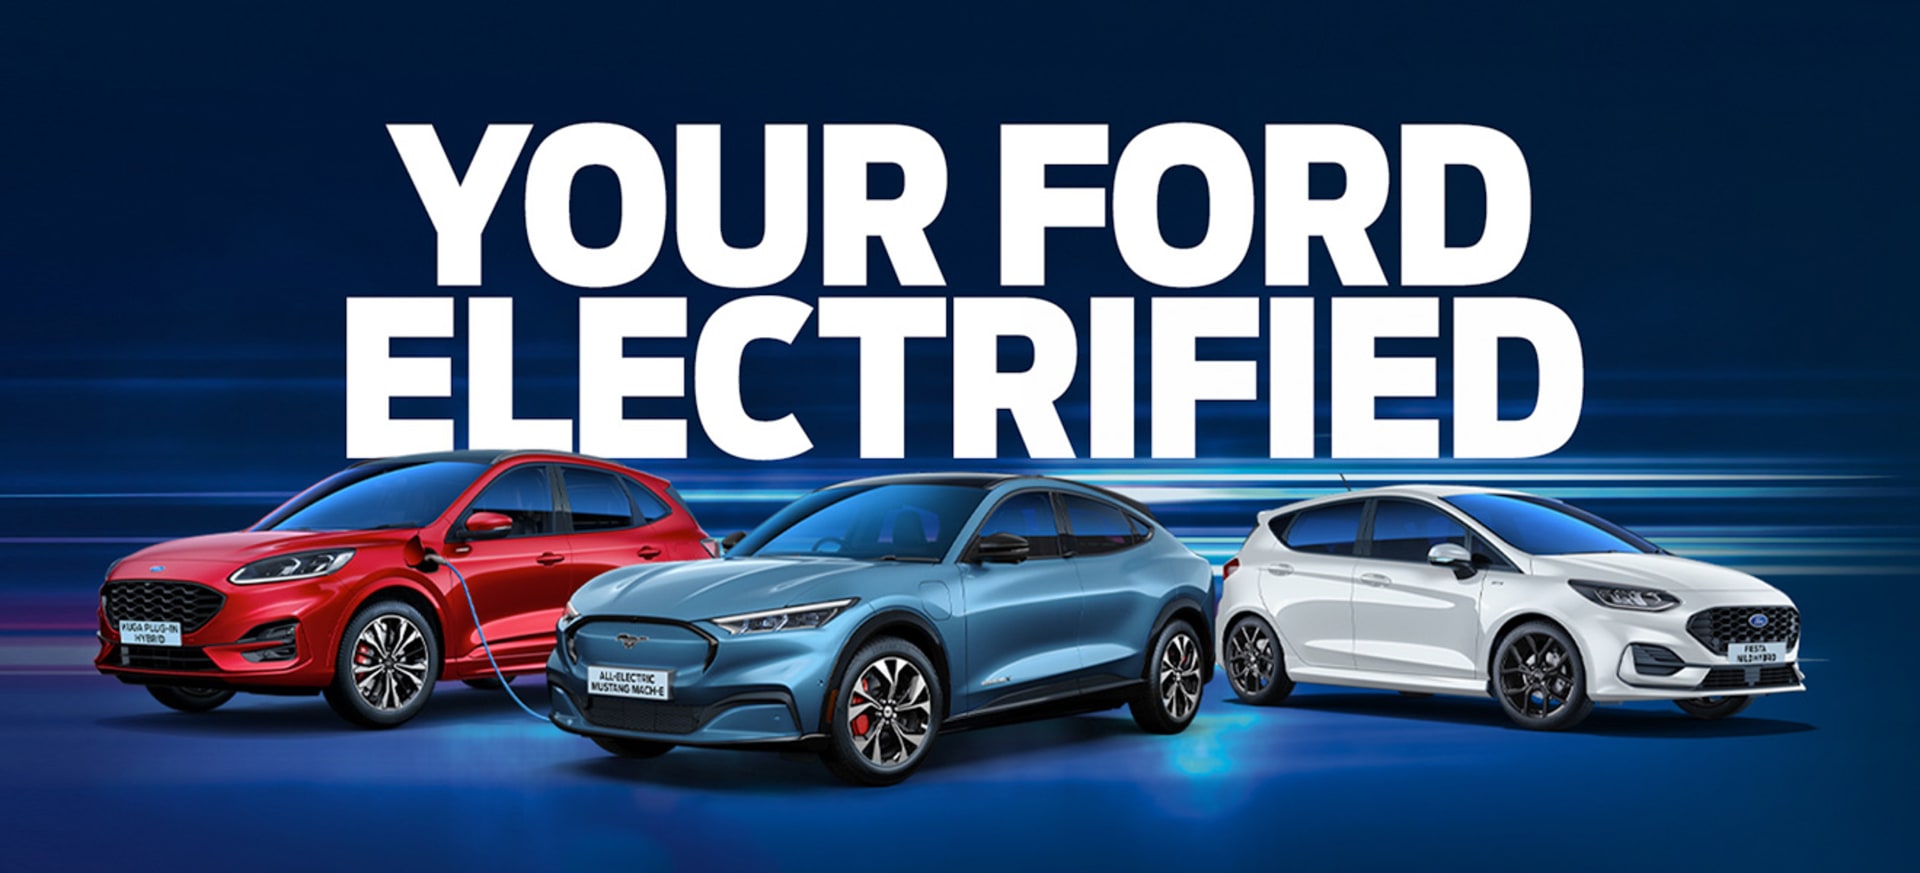 Ford - Your Ford Electrified Event banner